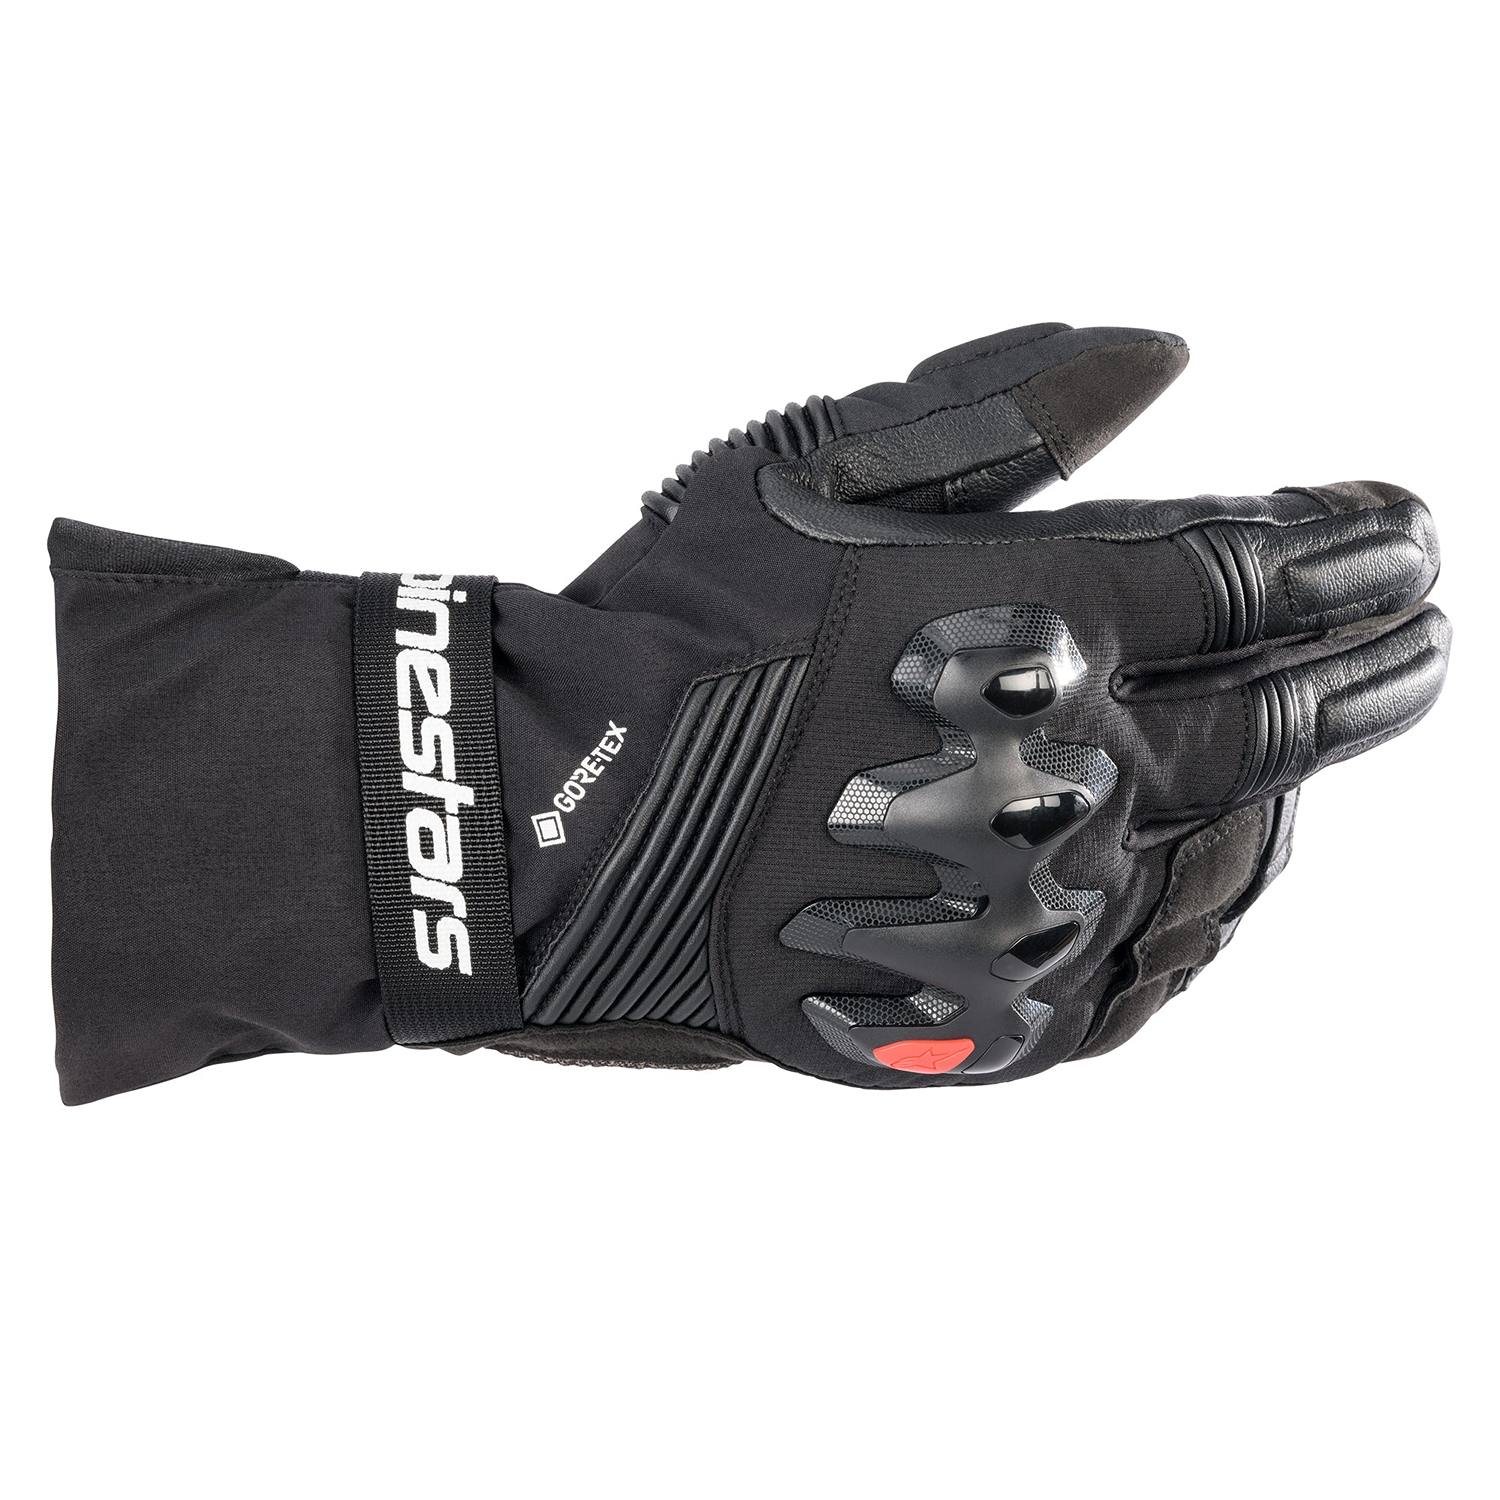 Image of Alpinestars Boulder Gore-Tex® Gloves With Gore Grip Technology Black Size S ID 8059347074504